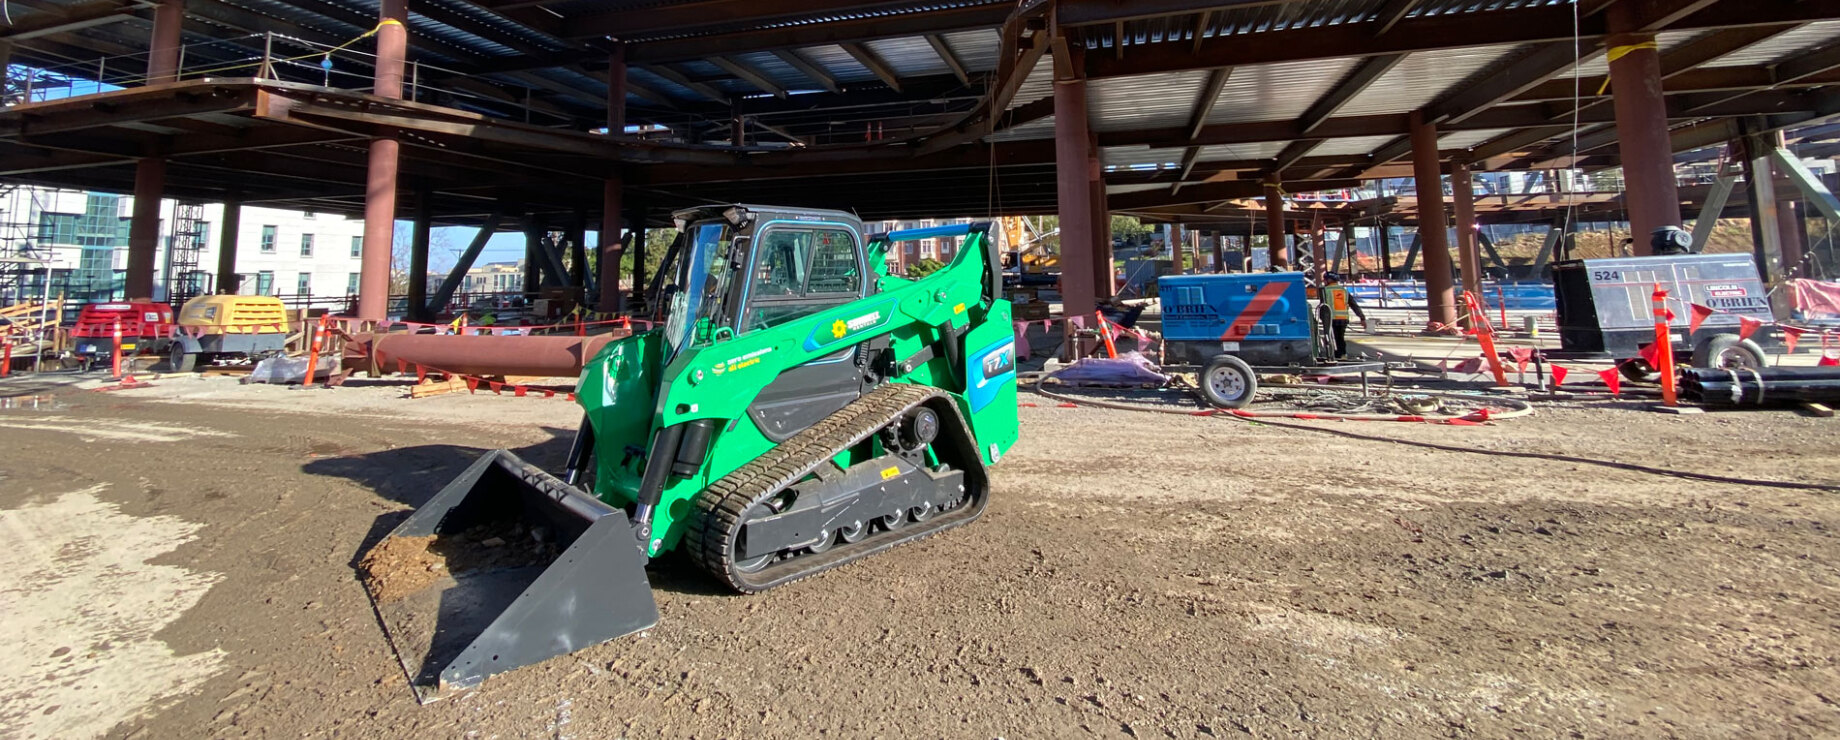 Turner Accelerates Sustainability Efforts With The Launch Of An All Electric Track Skid Steer